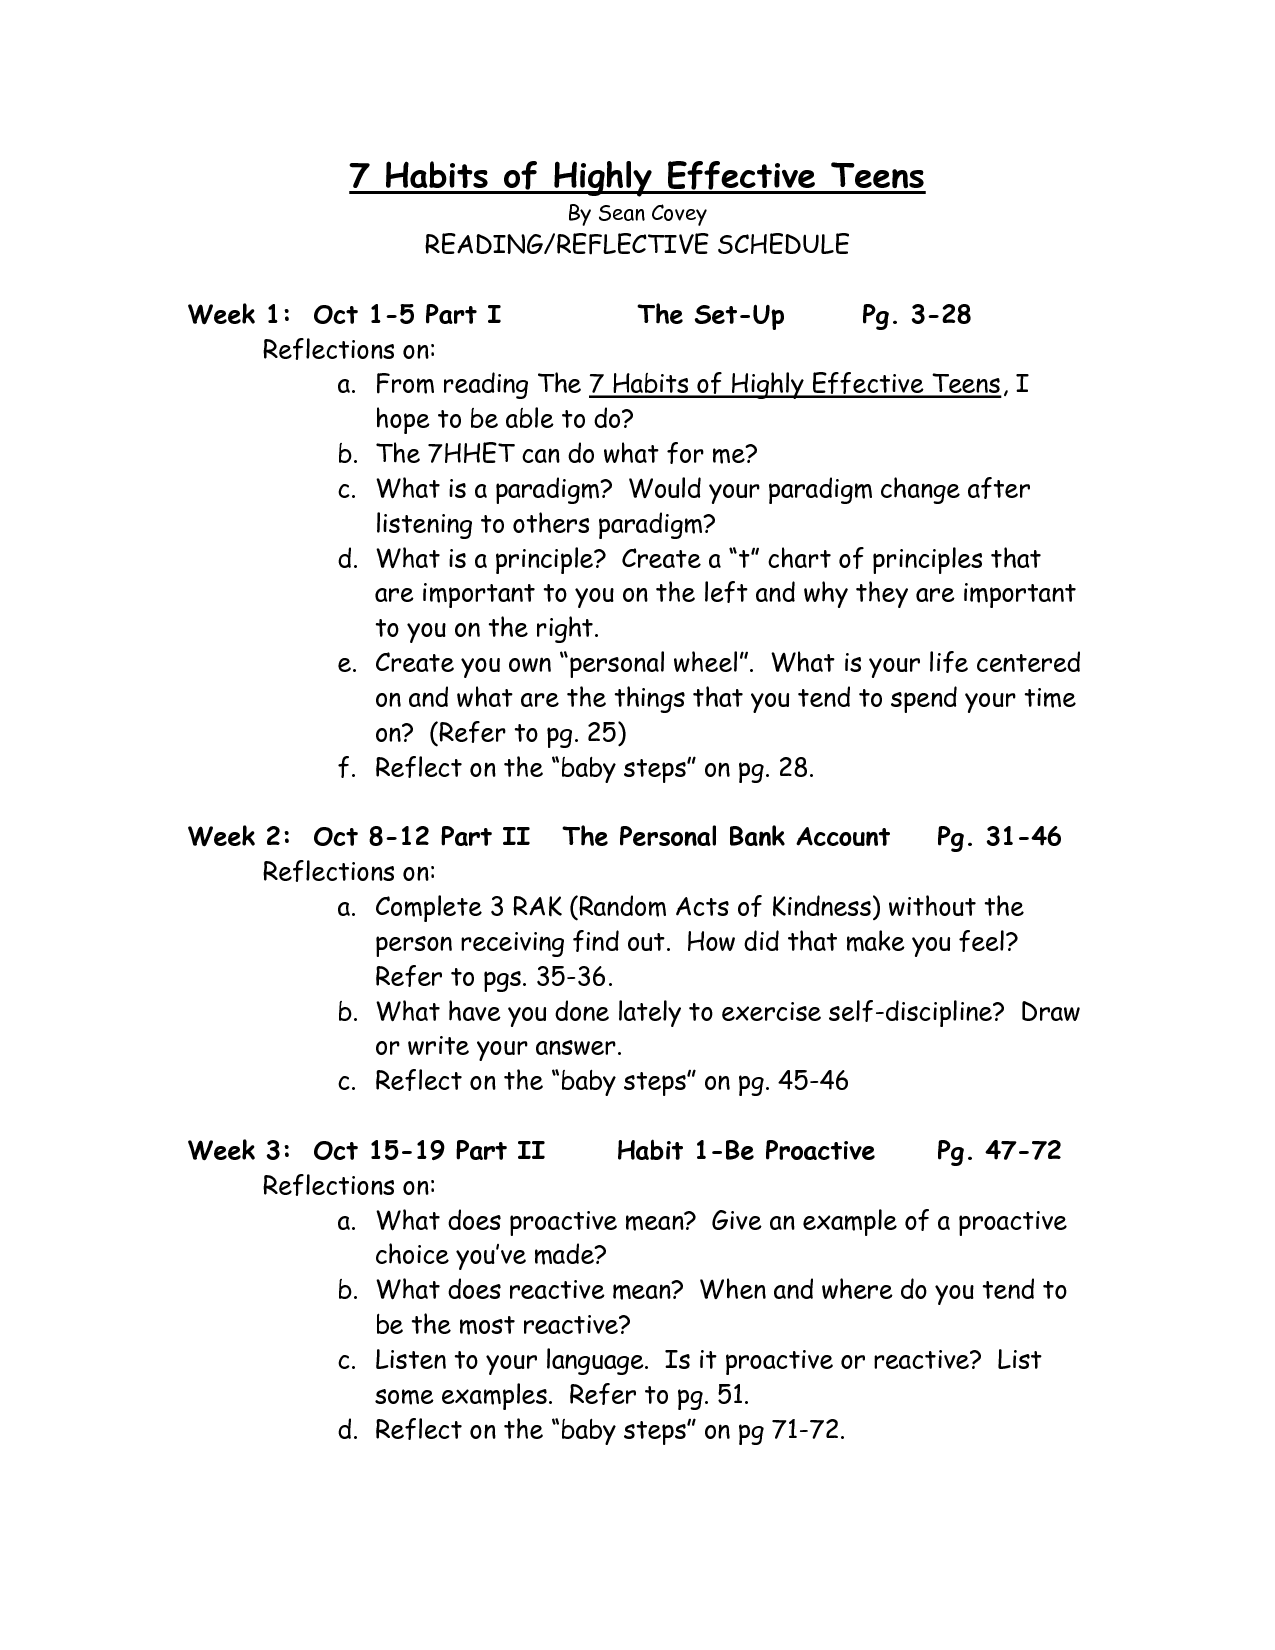 7 Habits of Highly Effective Teens Worksheets